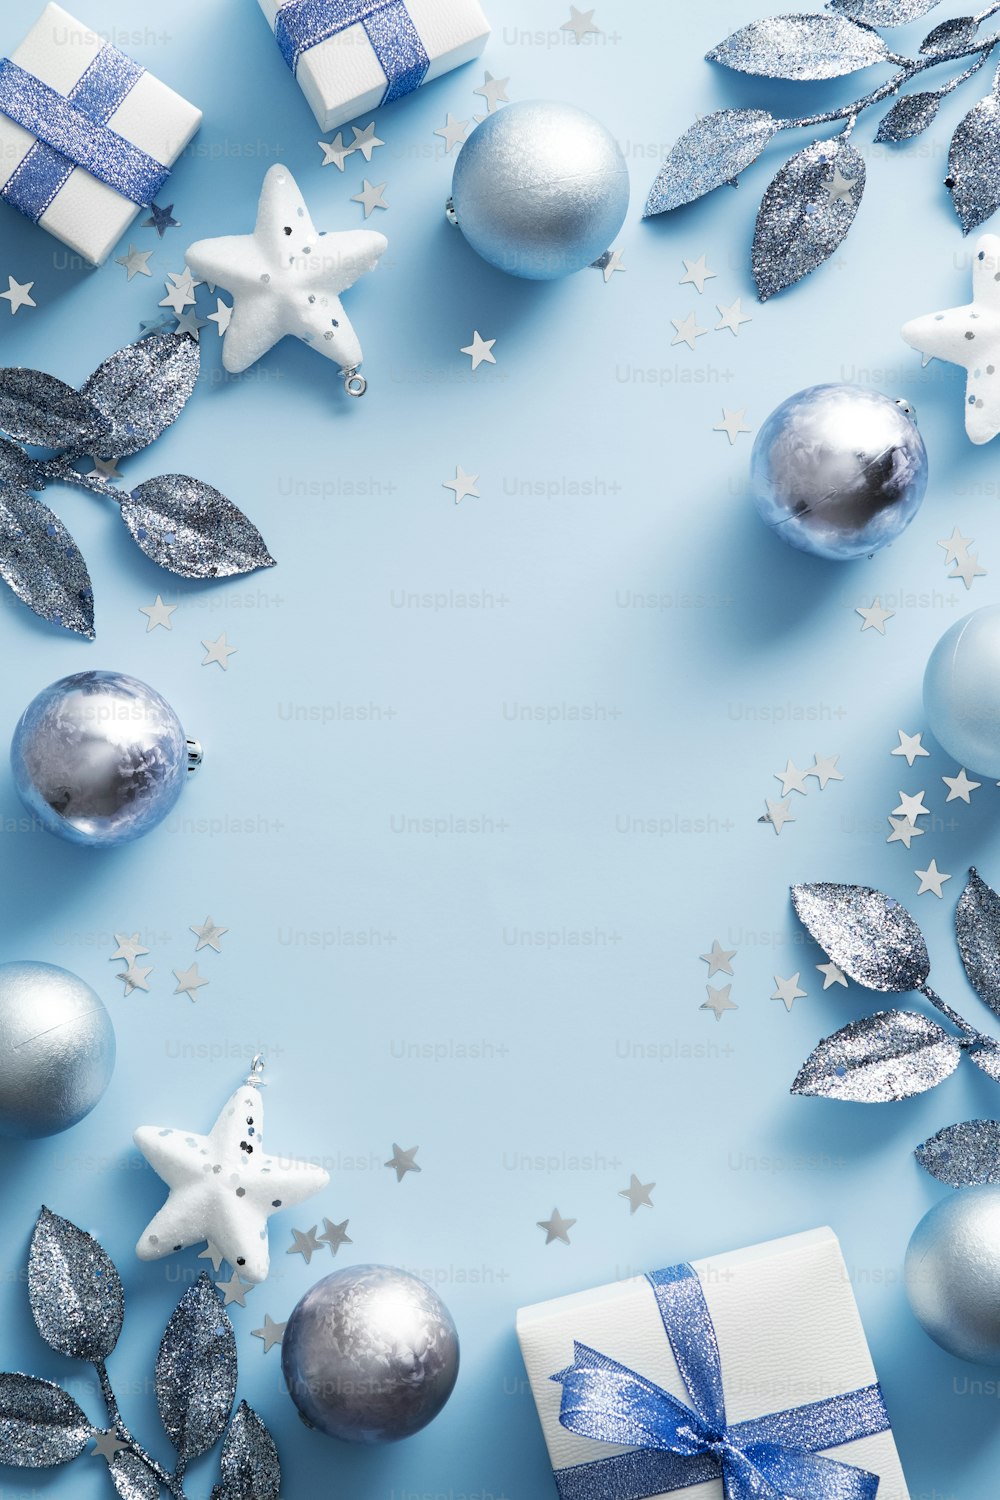 Merry Christmas vertical banner design. Silver and white Christmas decorations on blue background. Modern Xmas poster mockup.